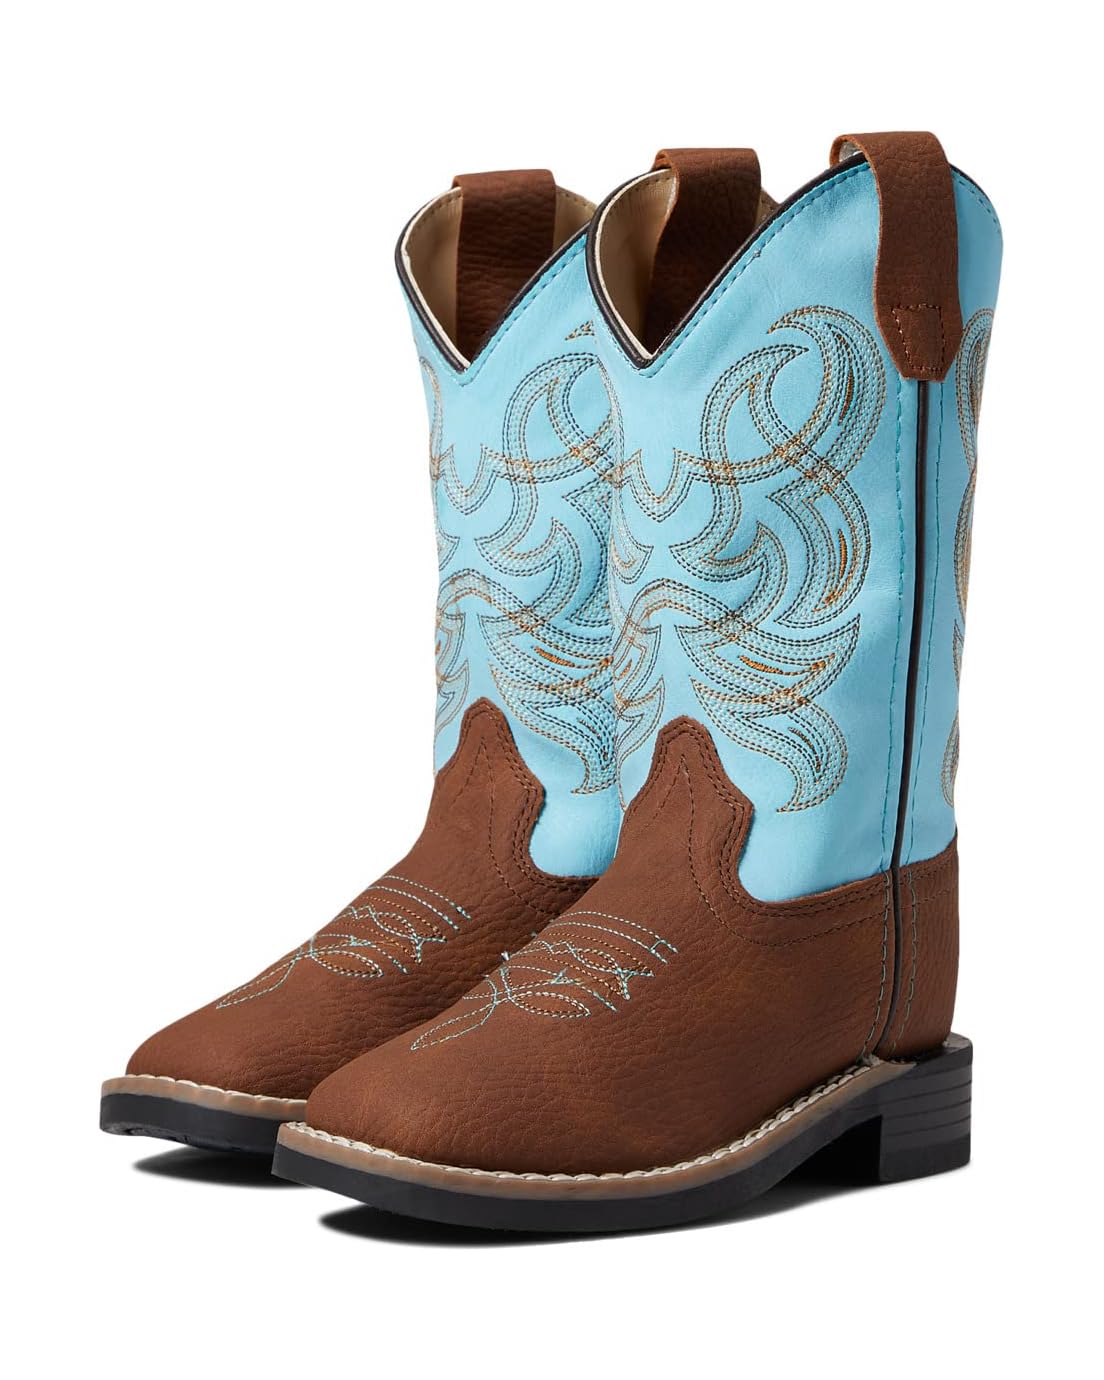 Old West Kids Boots Baby Blues (Toddler/Little Kid)